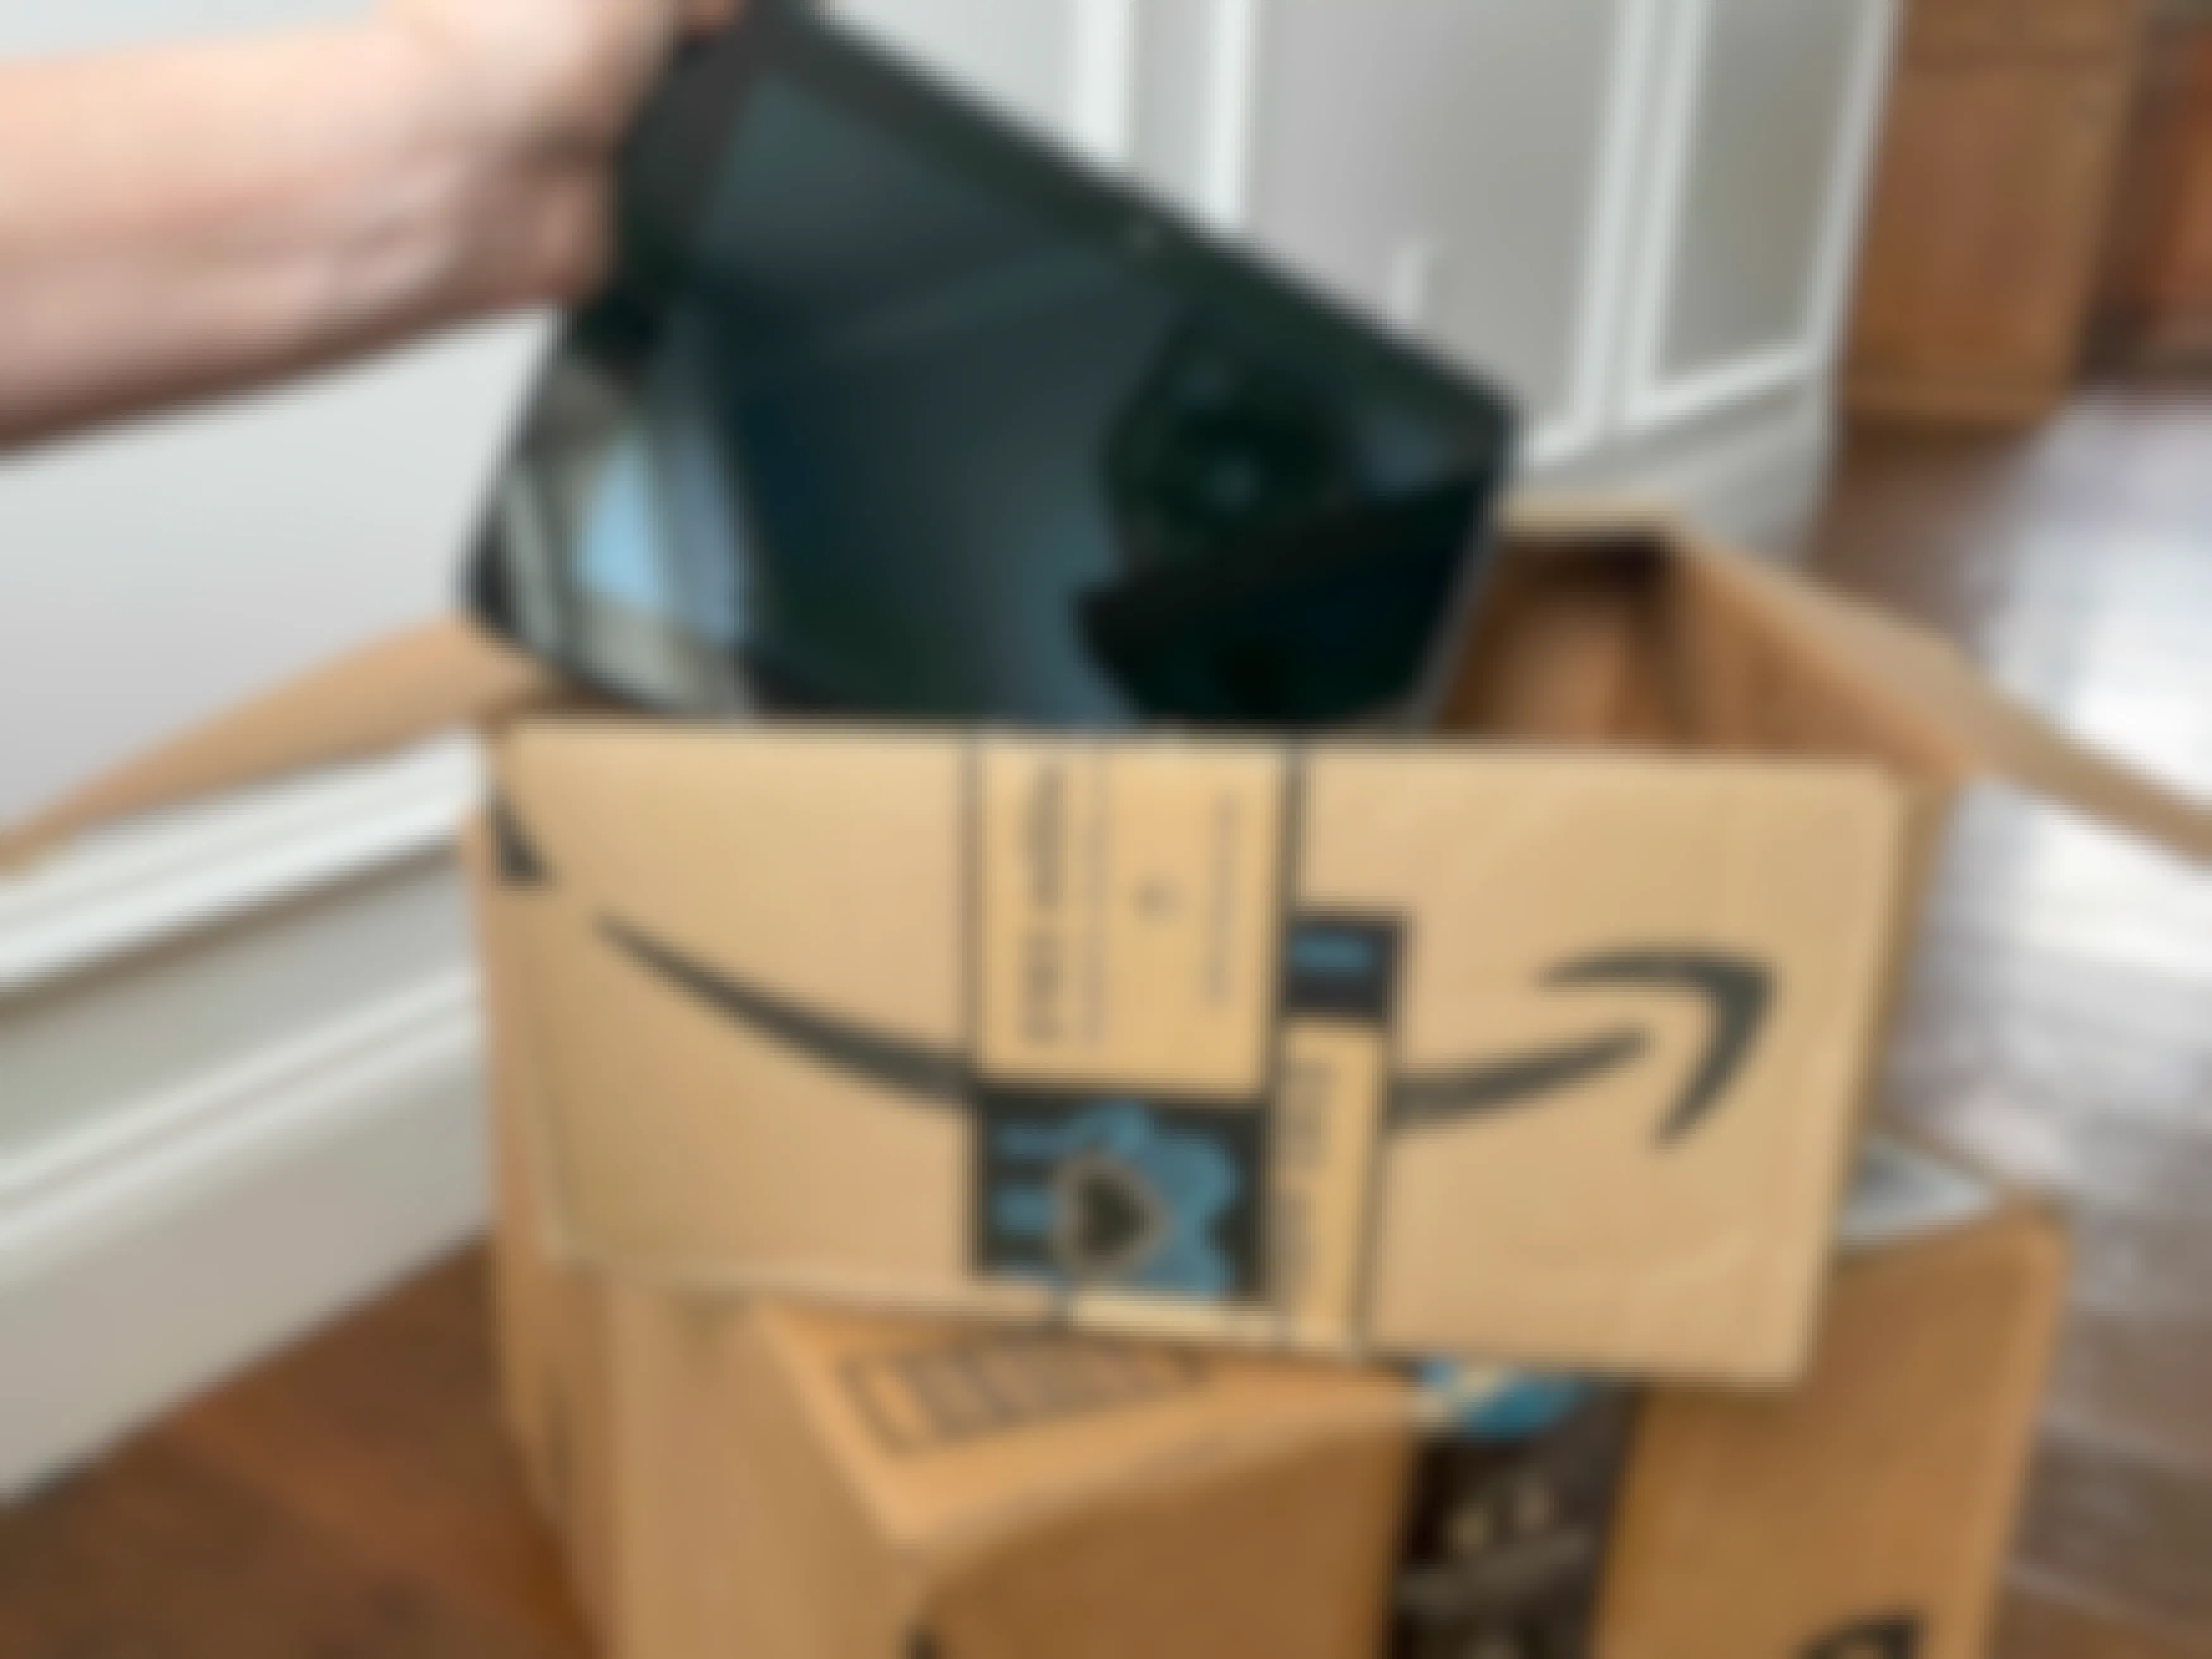 An amazon fire tablet held over an amazon box